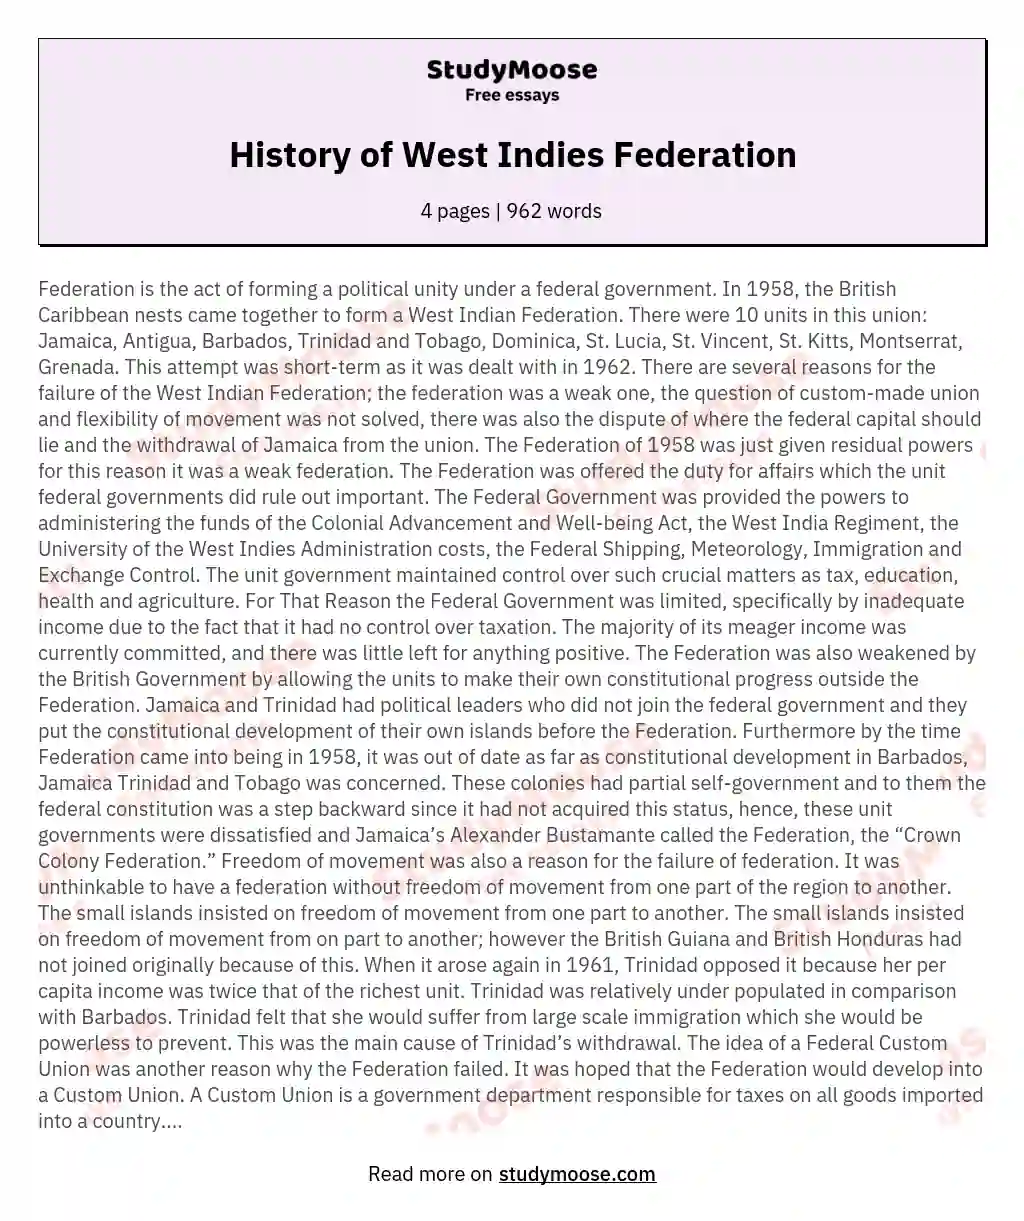 History of West Indies Federation essay